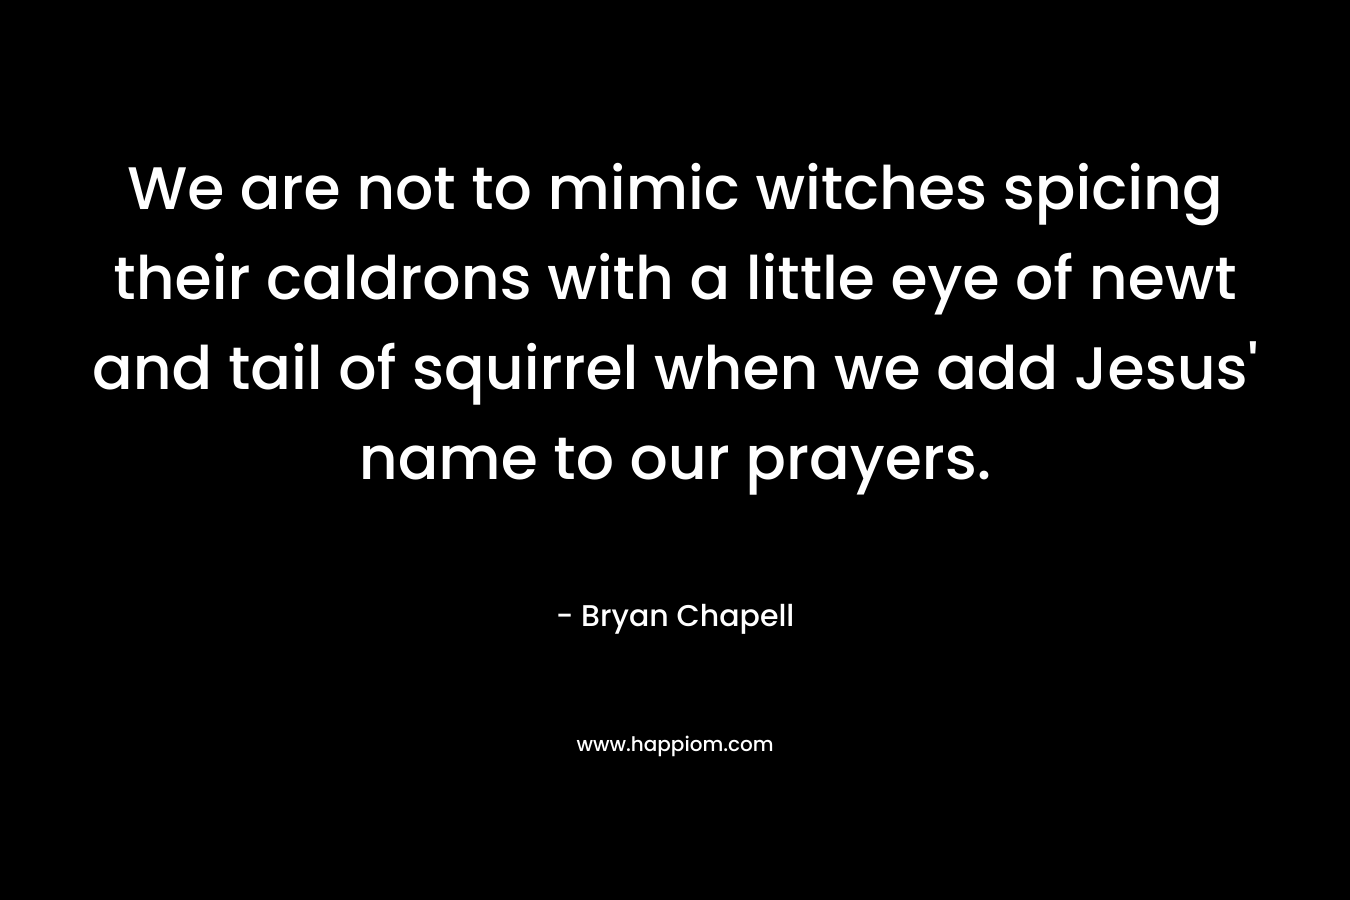 We are not to mimic witches spicing their caldrons with a little eye of newt and tail of squirrel when we add Jesus' name to our prayers.